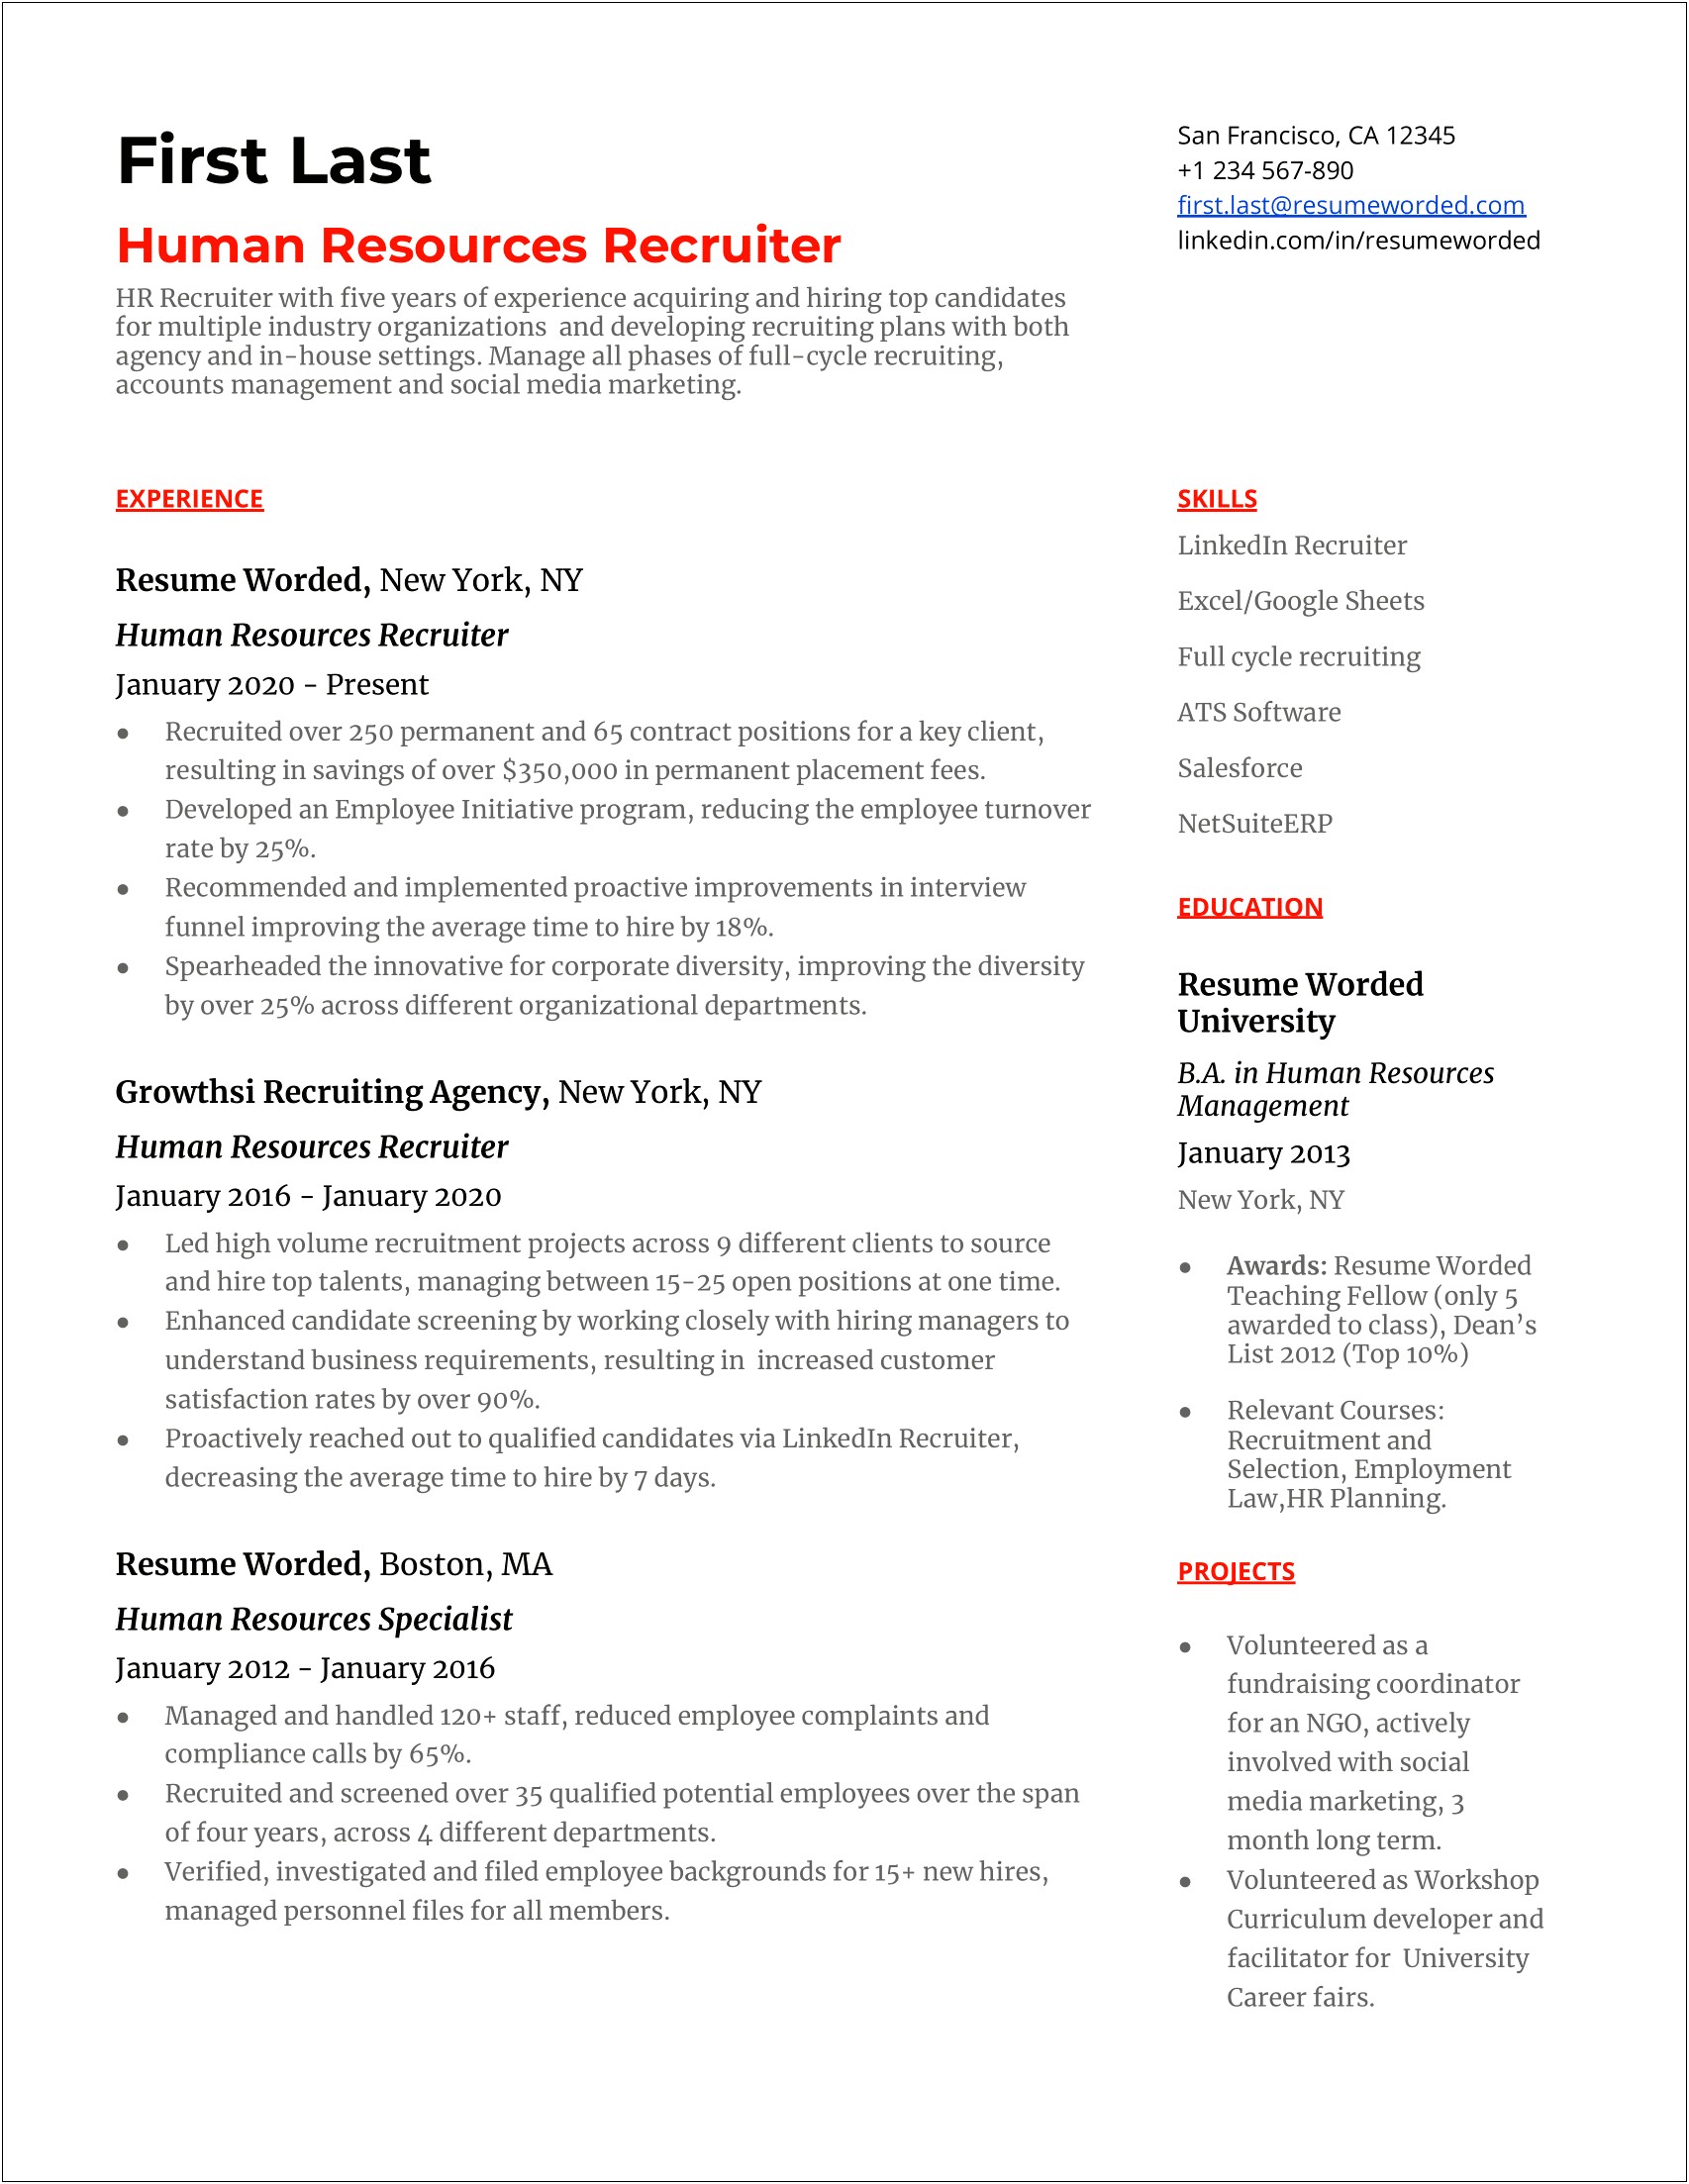 Sample Resume For Recruiter Without Experience